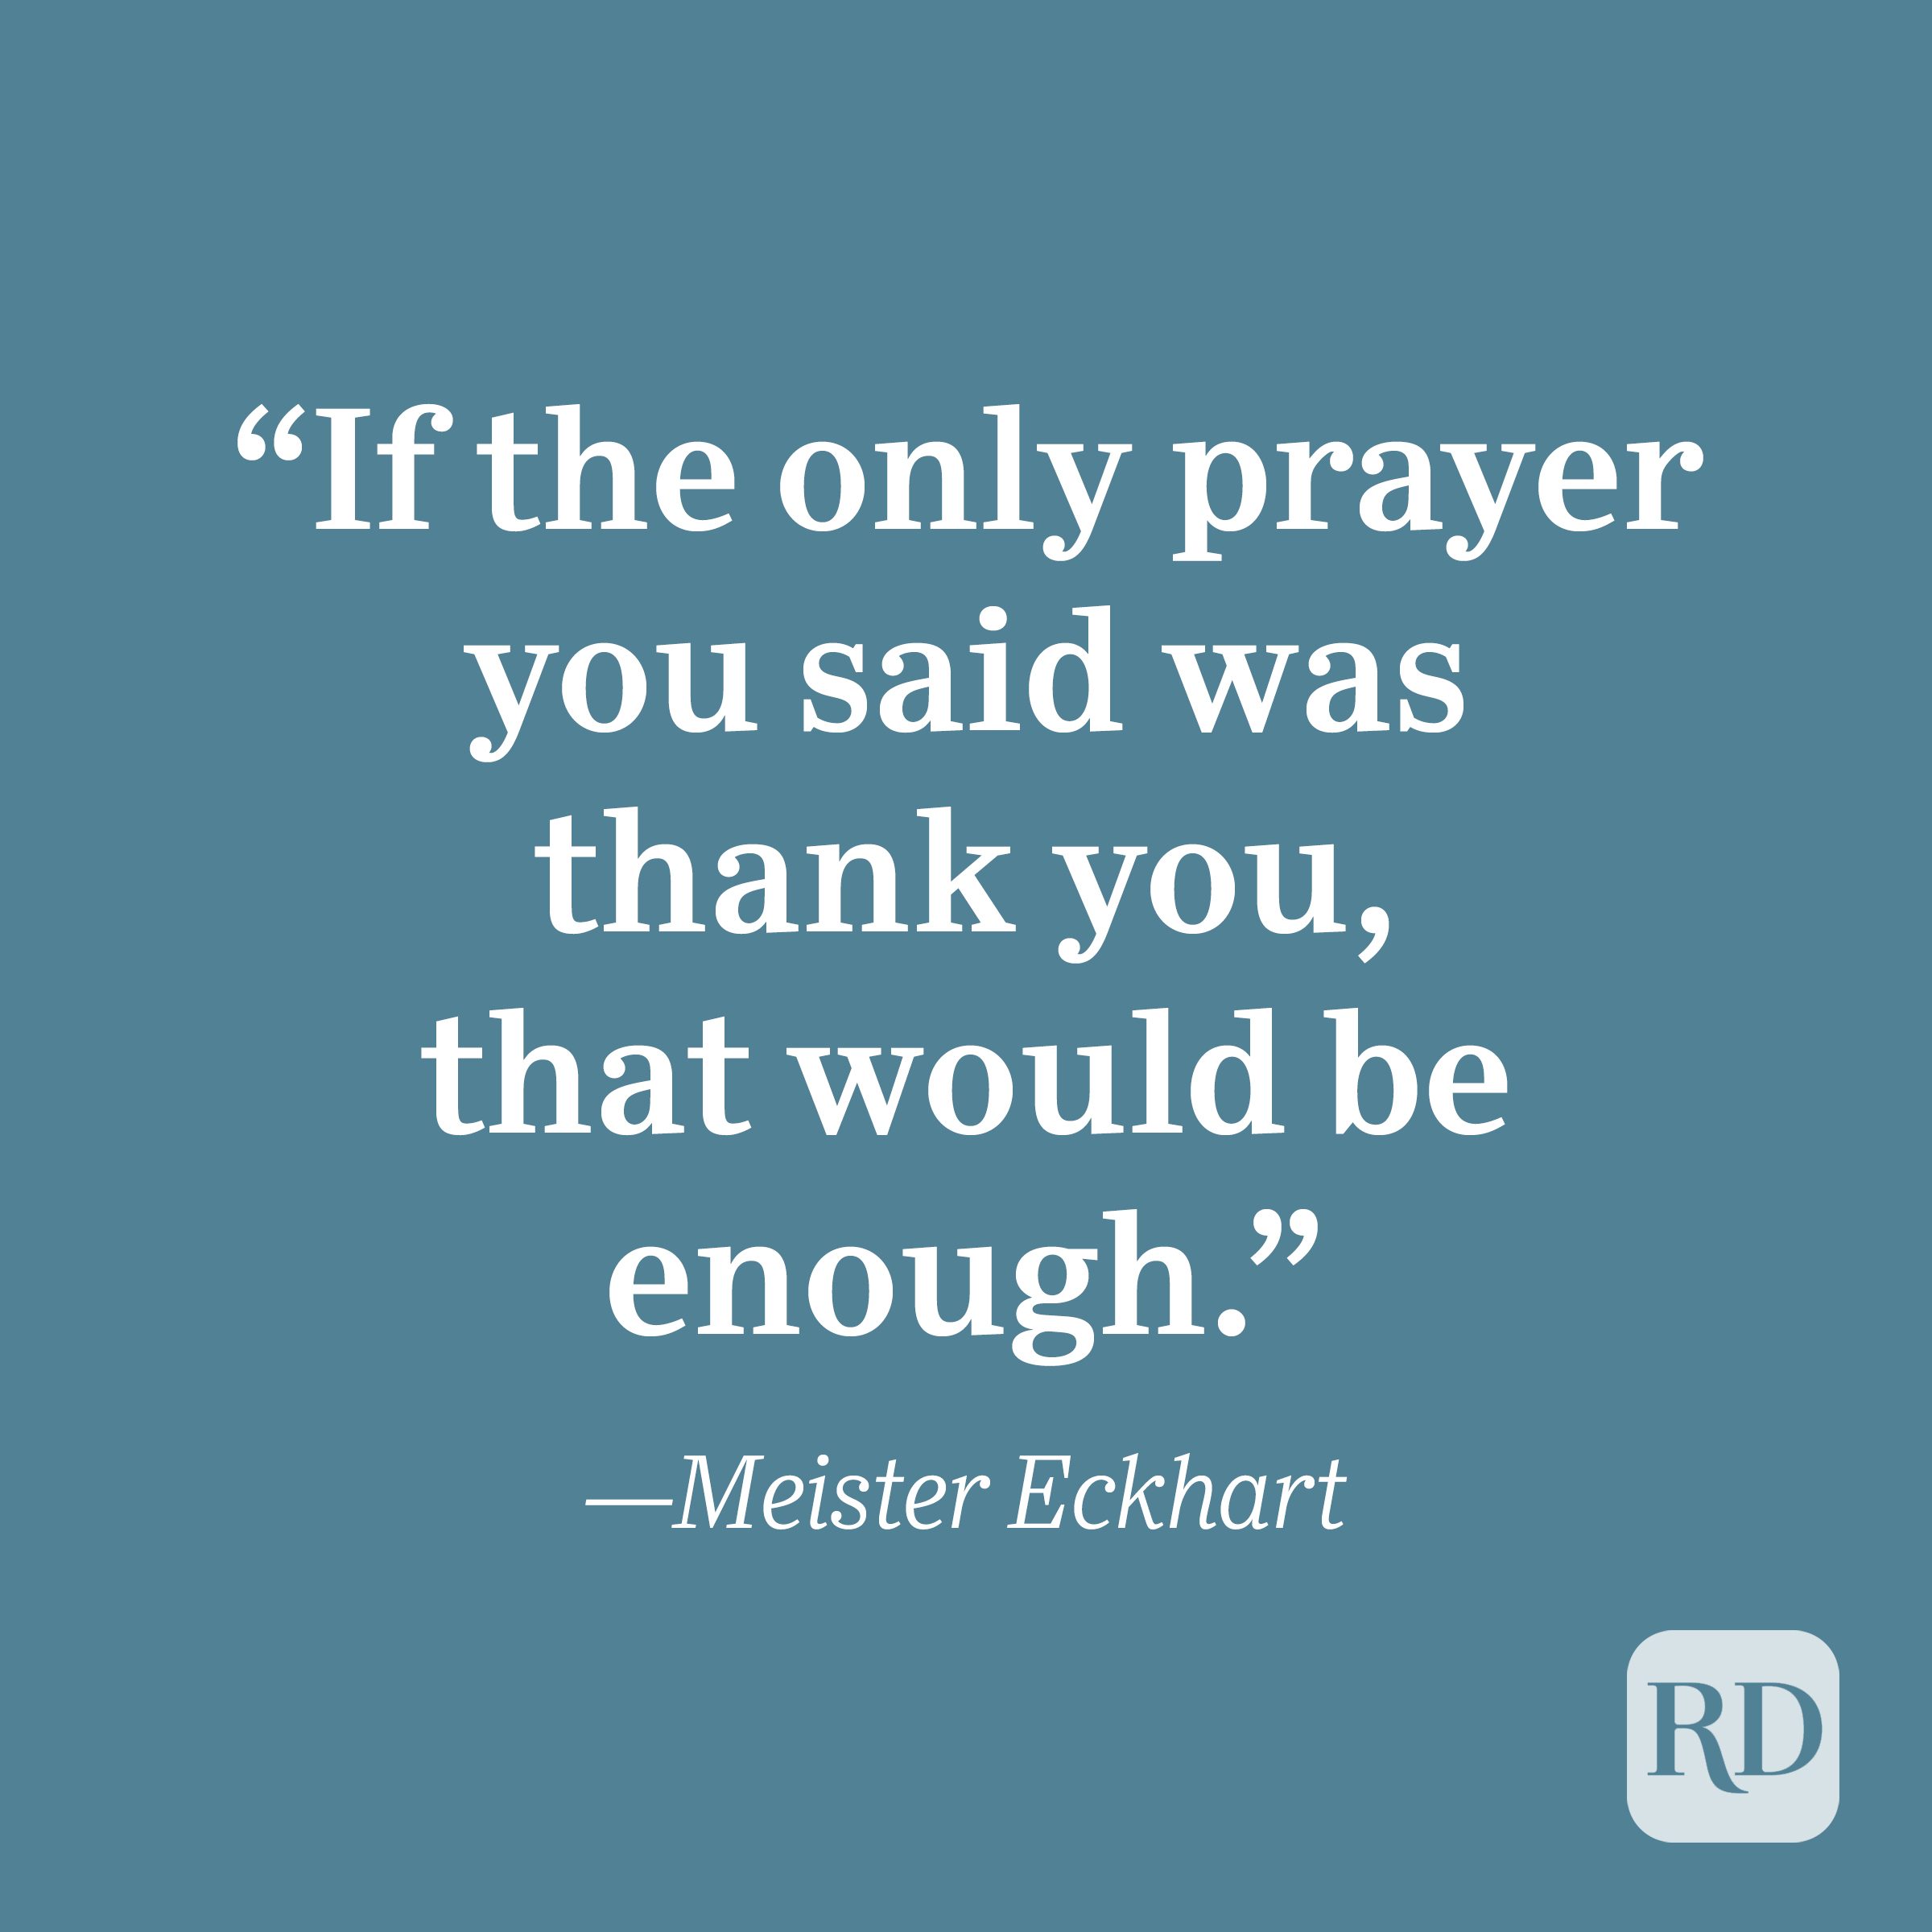 Meister Eckhart quote about gratitude.